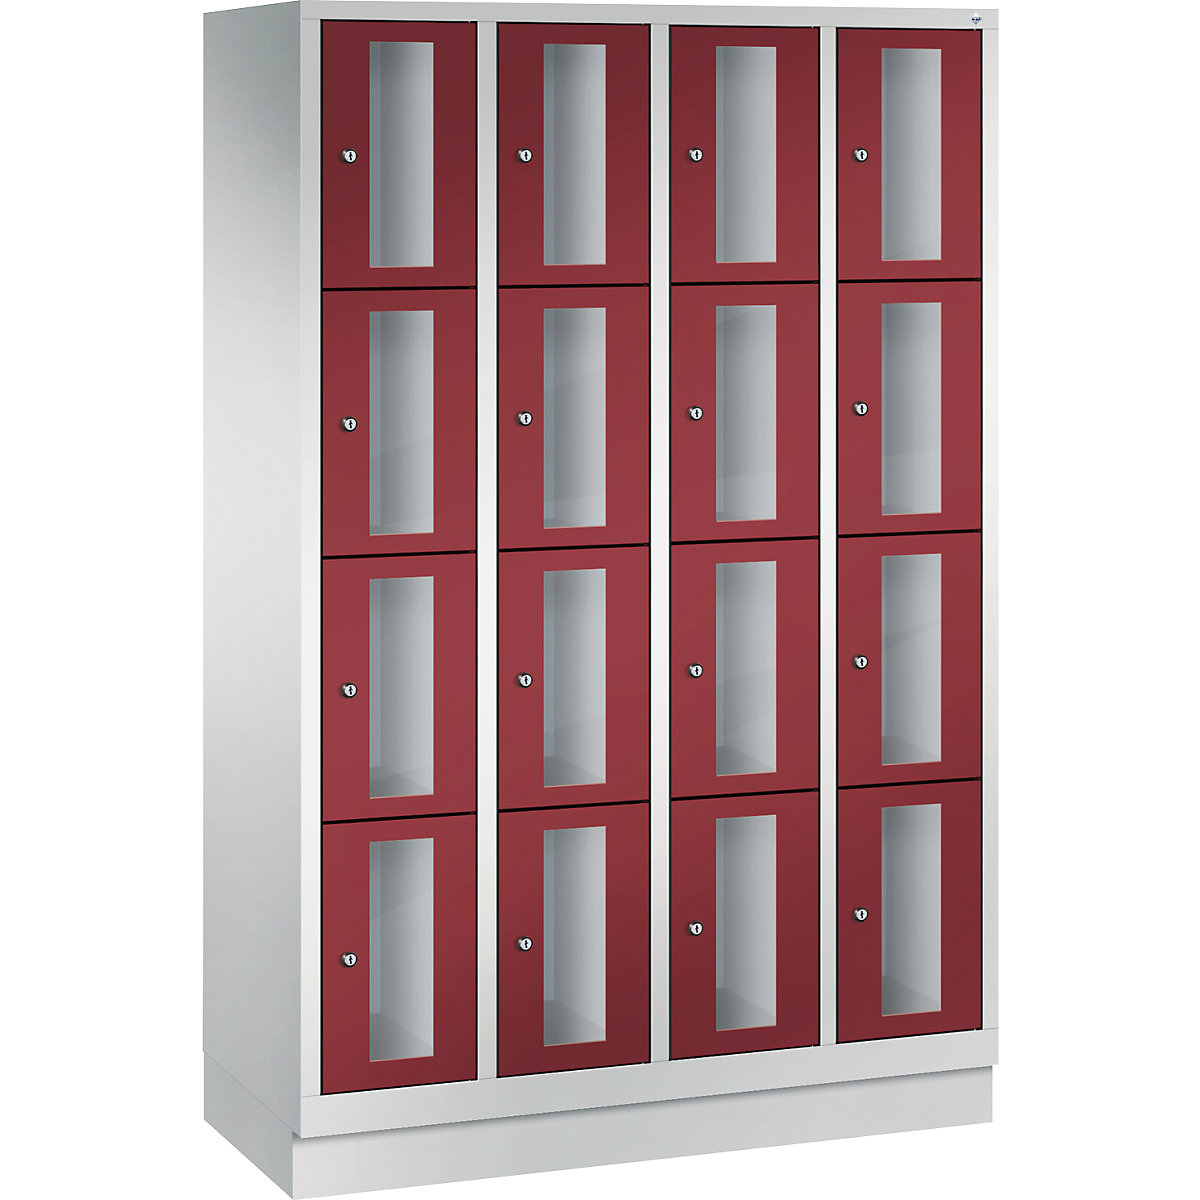 C+P – CLASSIC locker unit, compartment height 375 mm, with plinth, 16 compartments, width 1190 mm, ruby red door